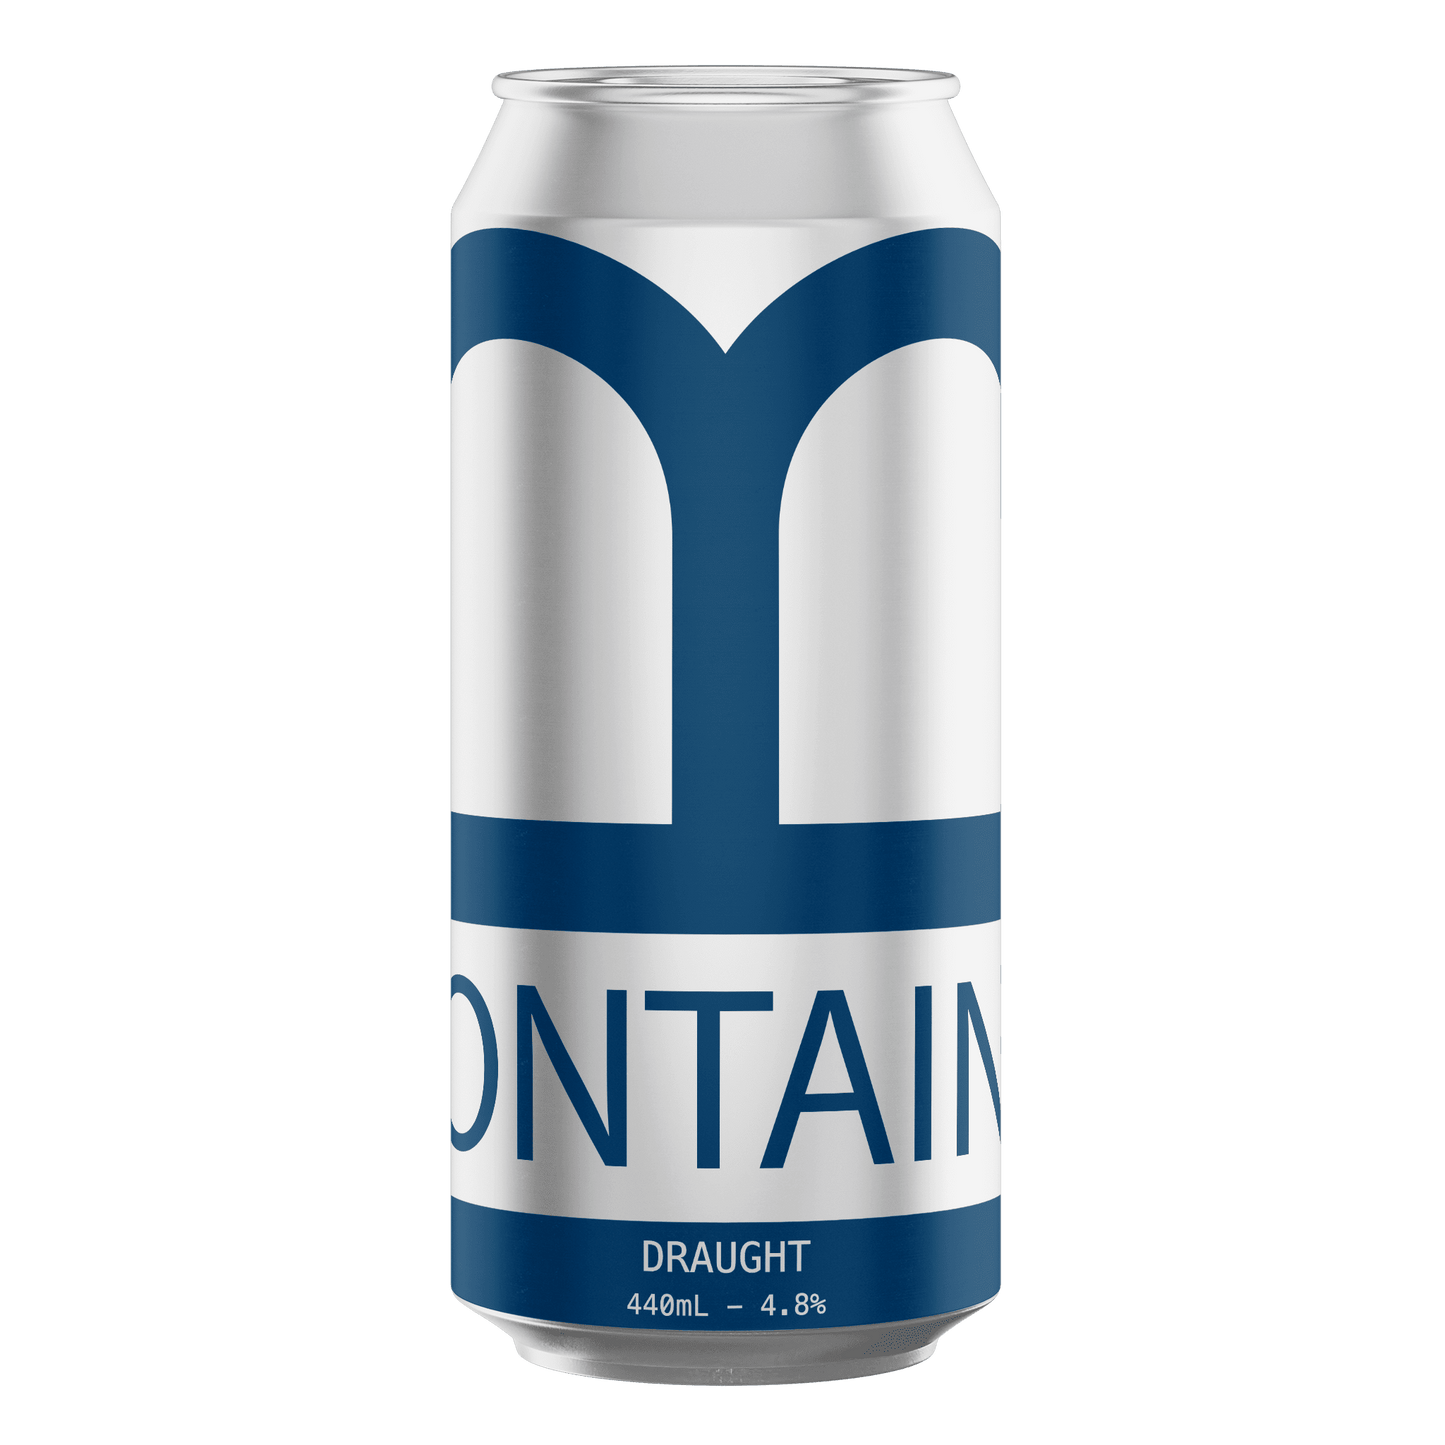 Fontaine Draught - Kolsch Style - 440mL Can